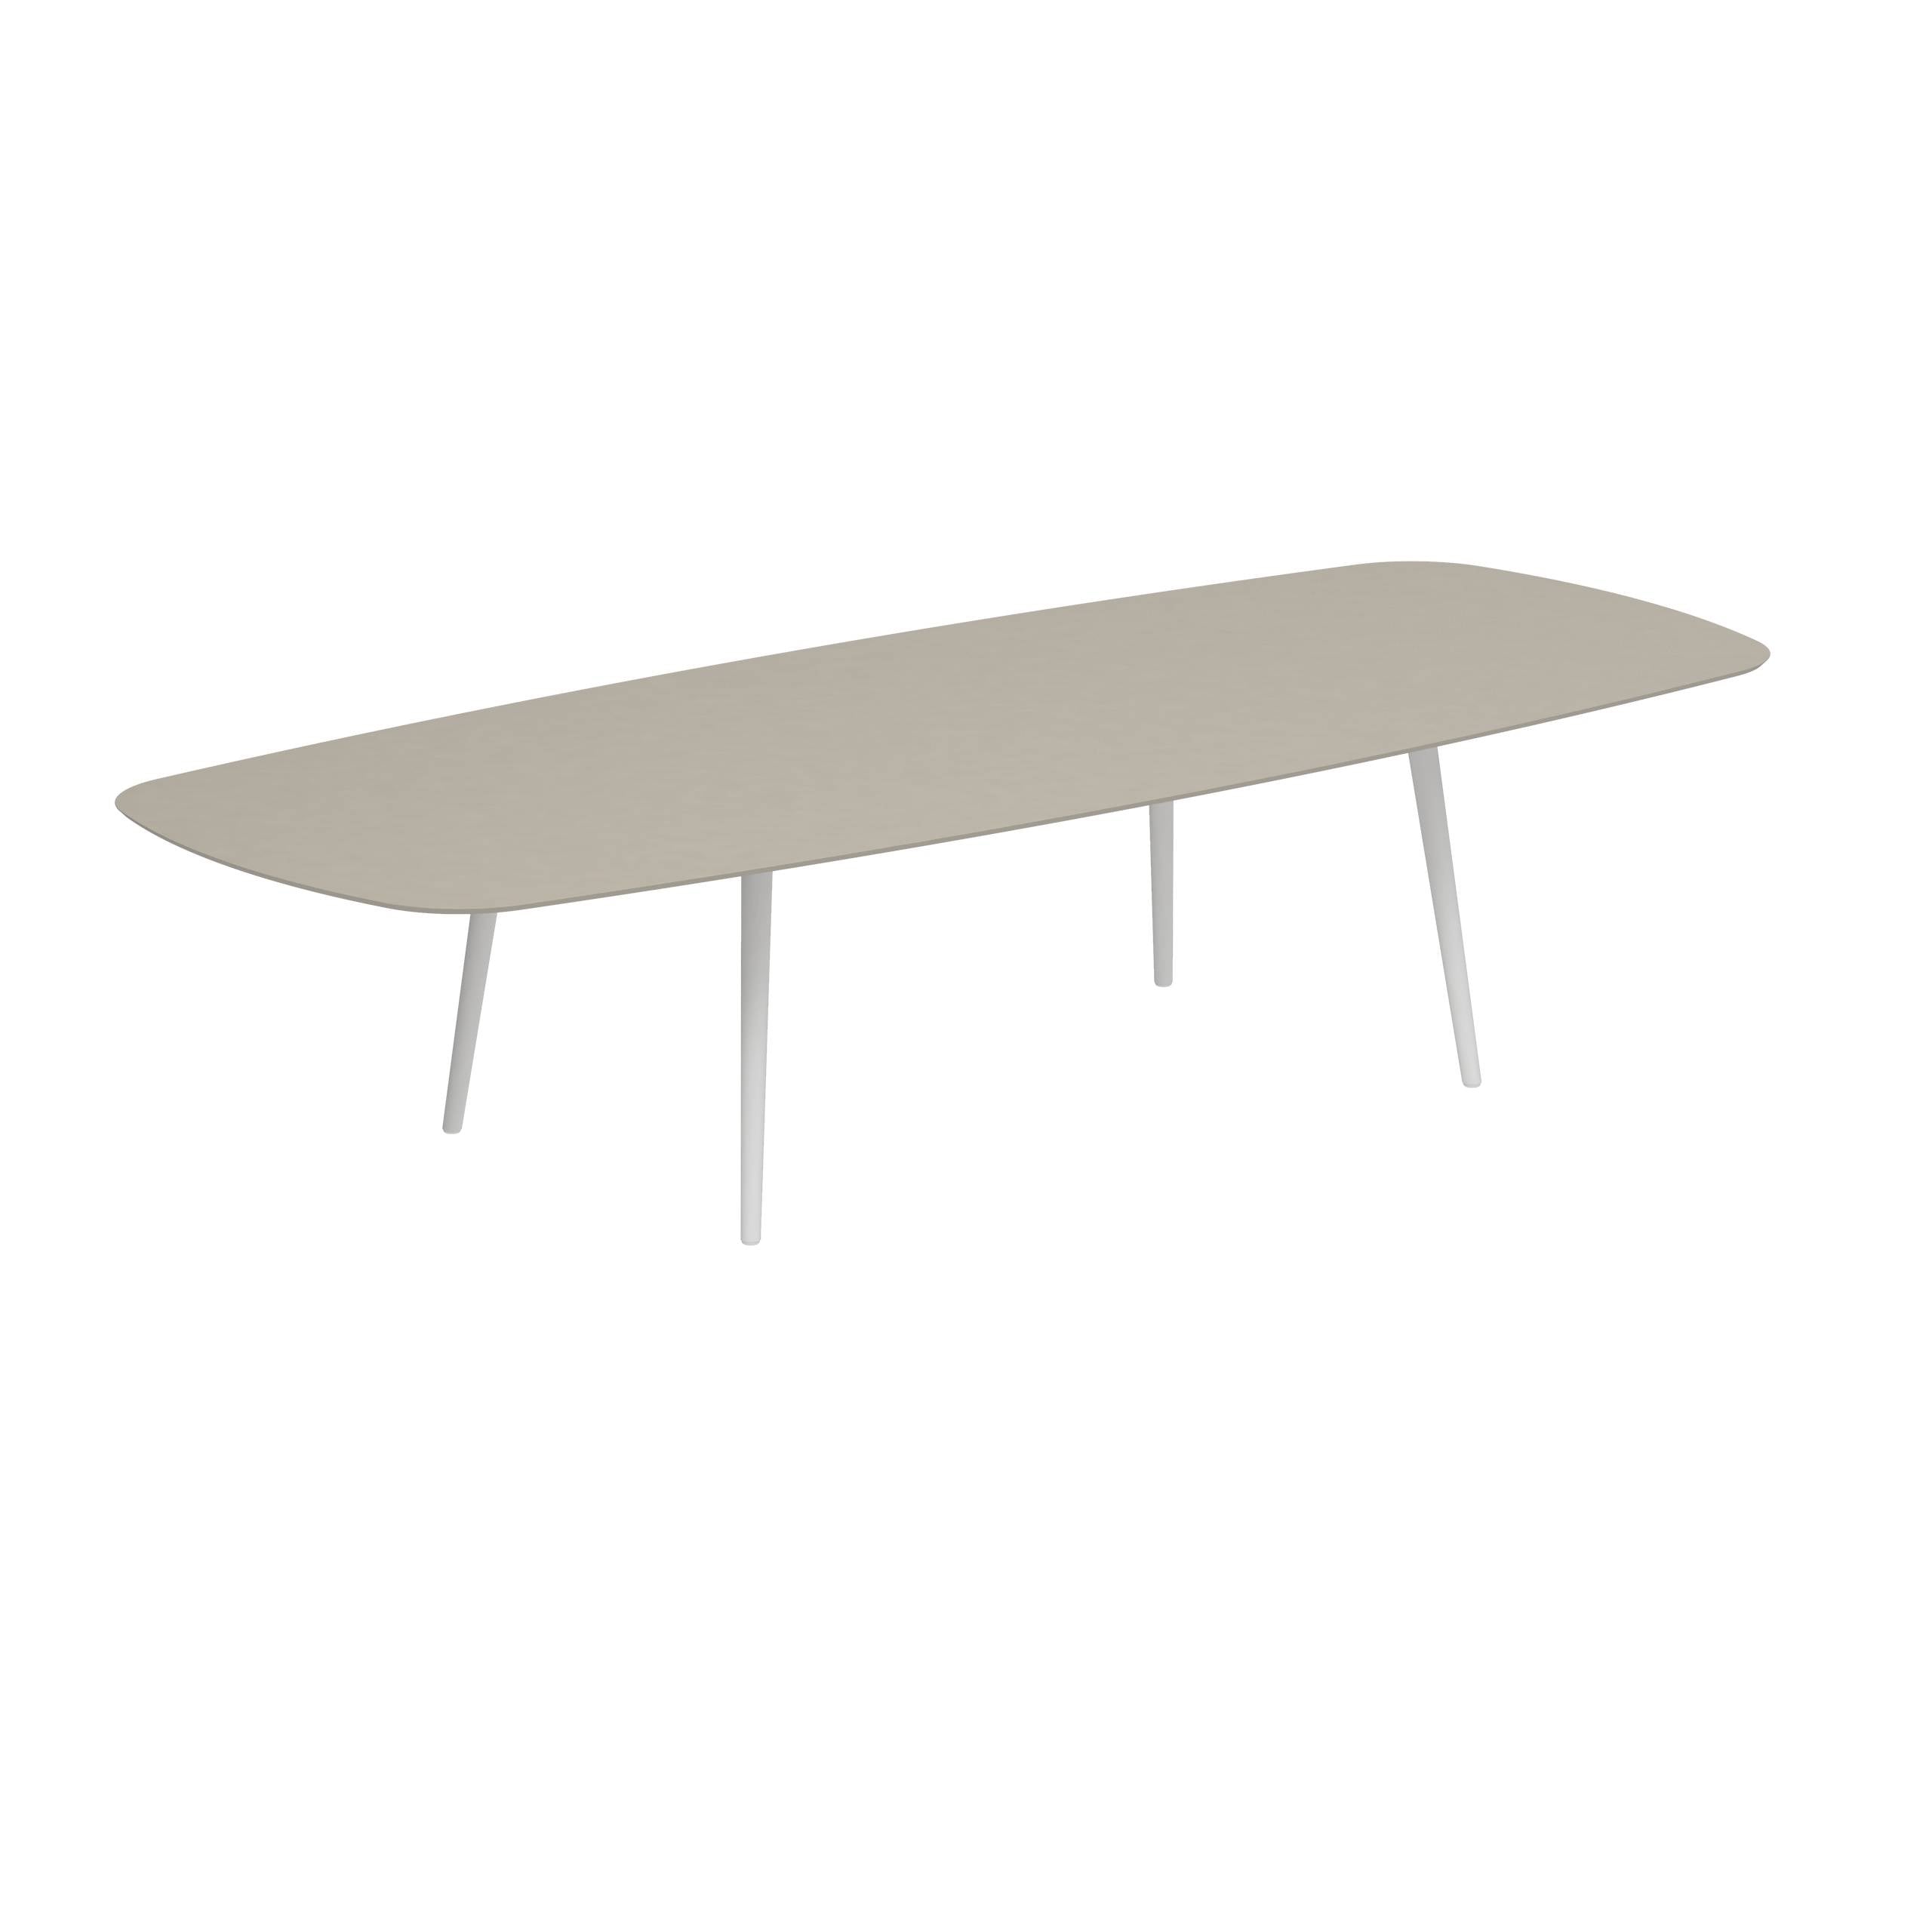 Styletto Low Dining Table 300x120cm Alu Legs White Ceramic Top Pearl Grey